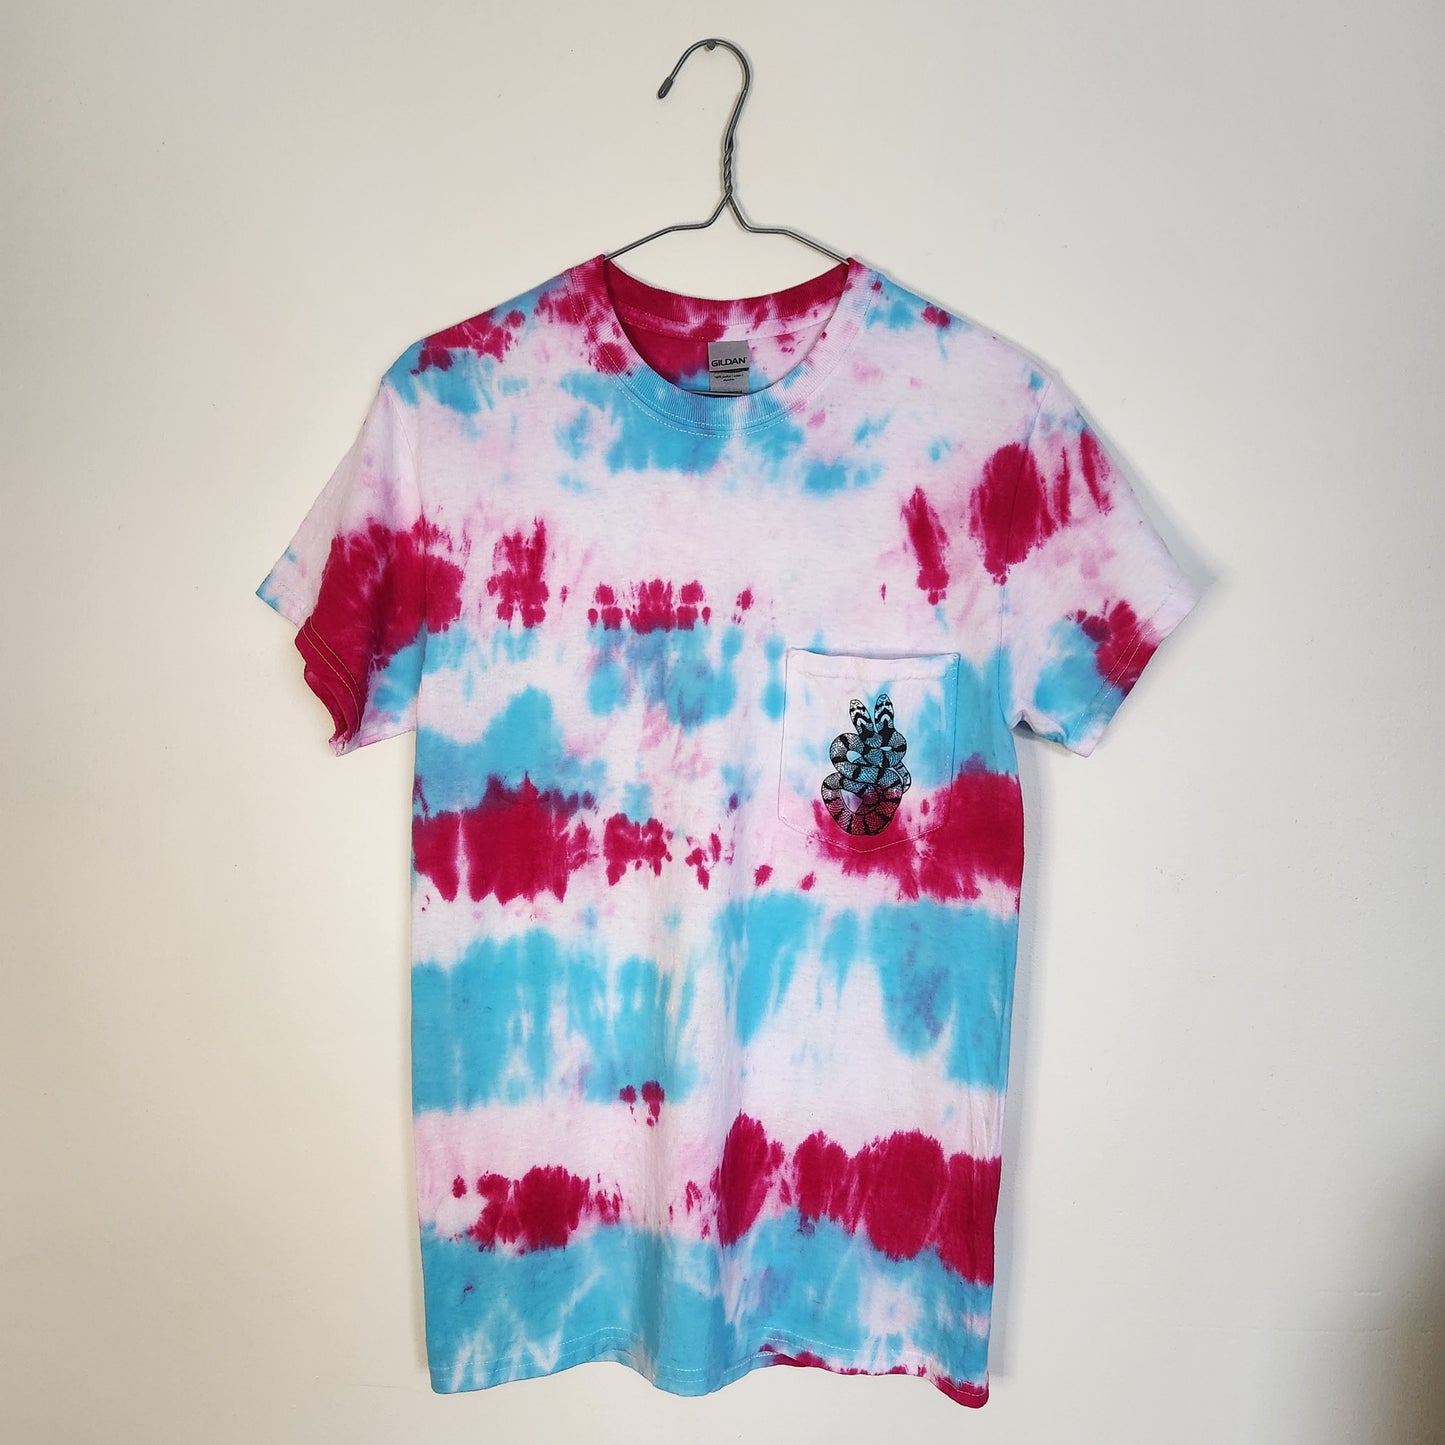 Tie Dye Shirts - Limited Edition